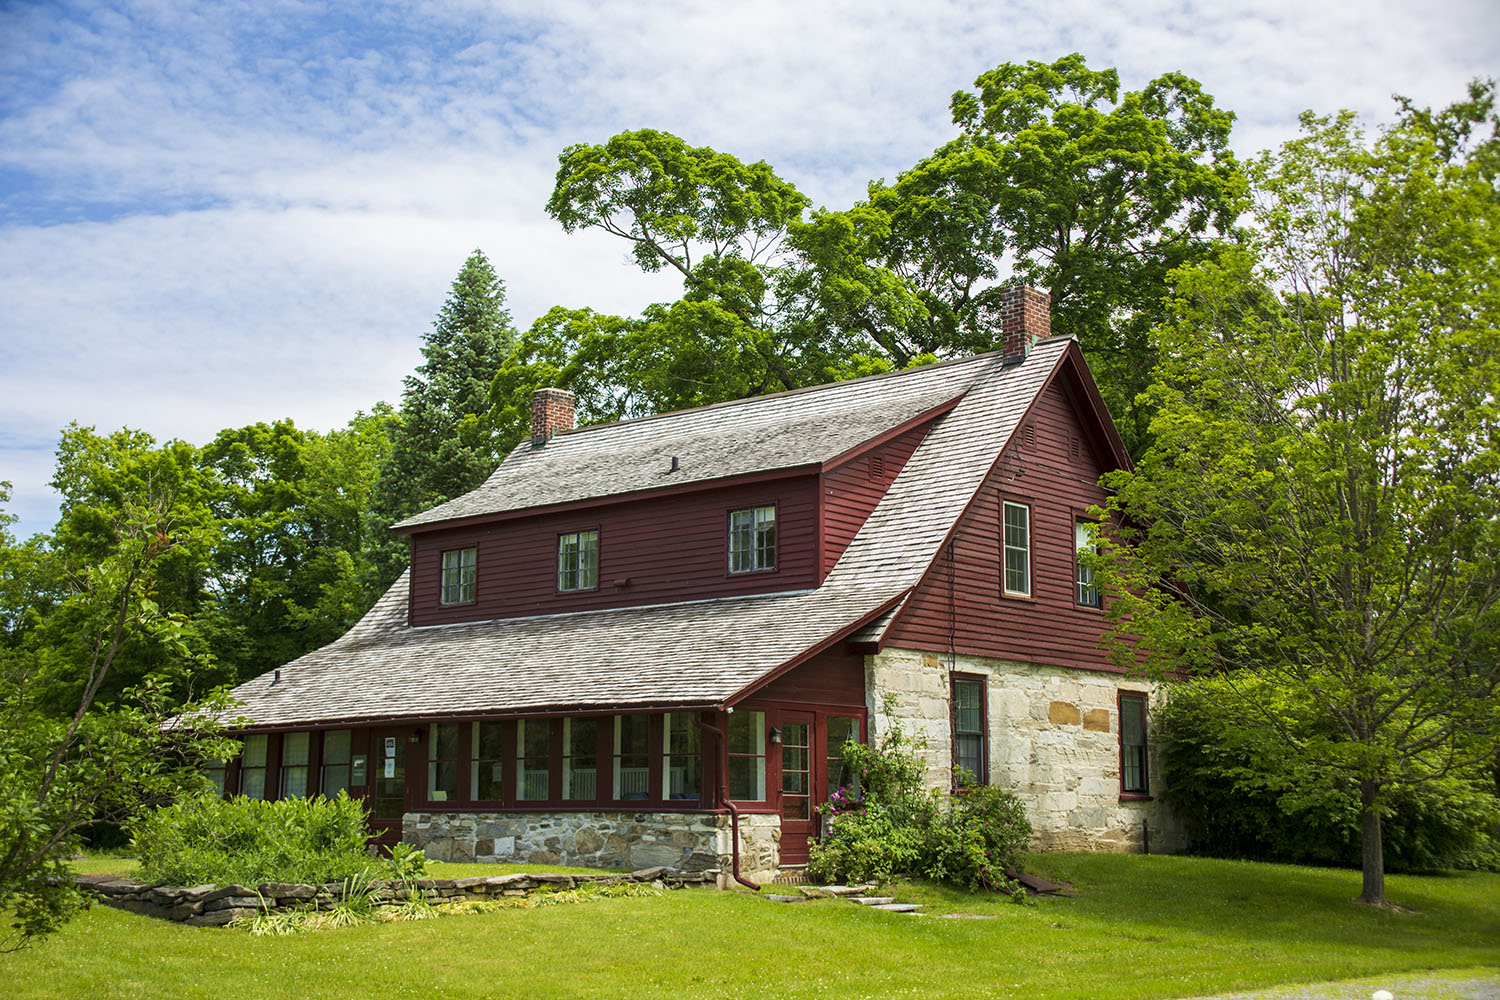 Robert Frost Stone House Museum